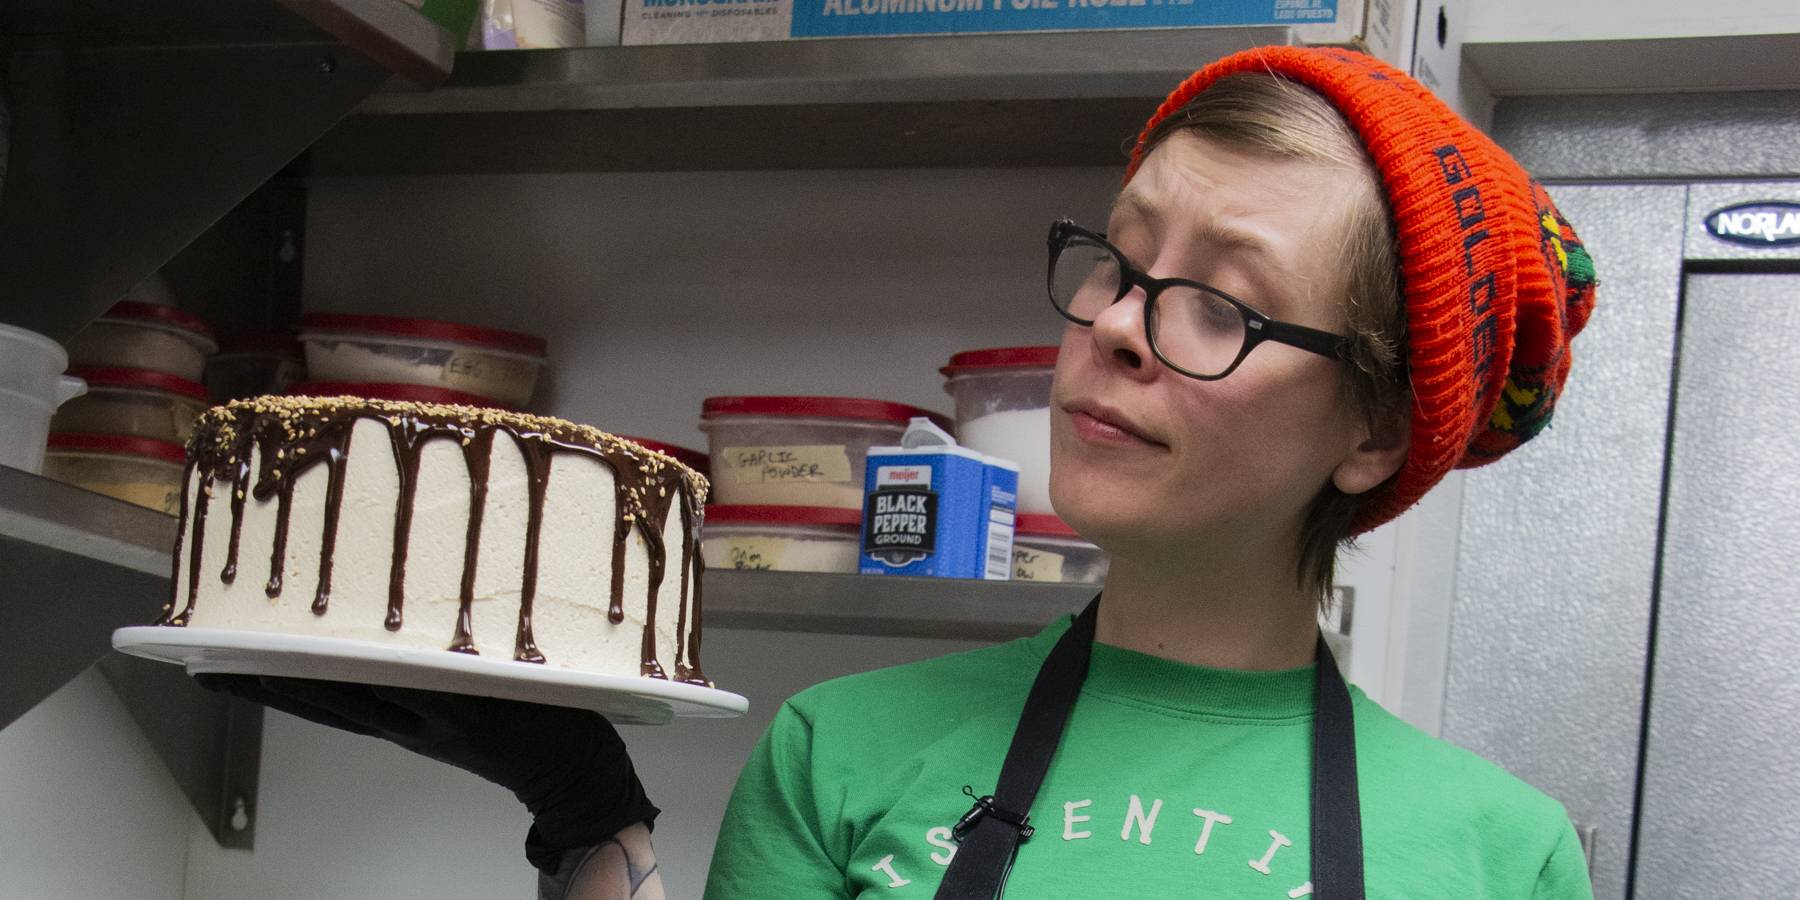 In a commerical kitchen, a person wearing a green t-shirt, black apron, black glasses, and an orange knit hat looks at a cake they hold to the side. The cake is cream colored with chocolate drips down the side. Photo by Steven Pratten.